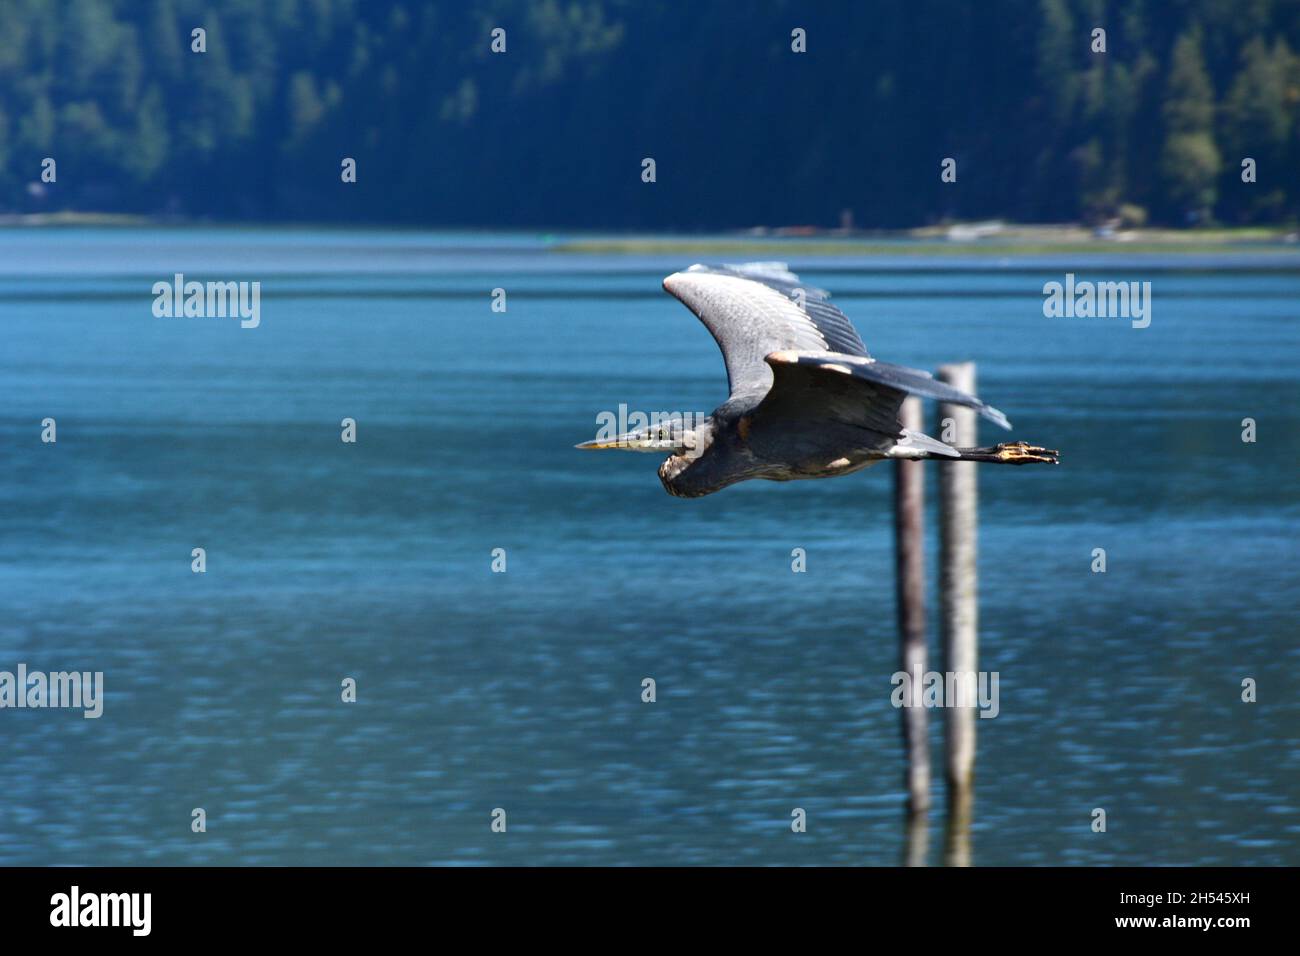 A great blue heron flying above the shores of Pitt Lake, a natural bird sanctuary, near Pitt Meadows, British Columbia, Canada. Stock Photo